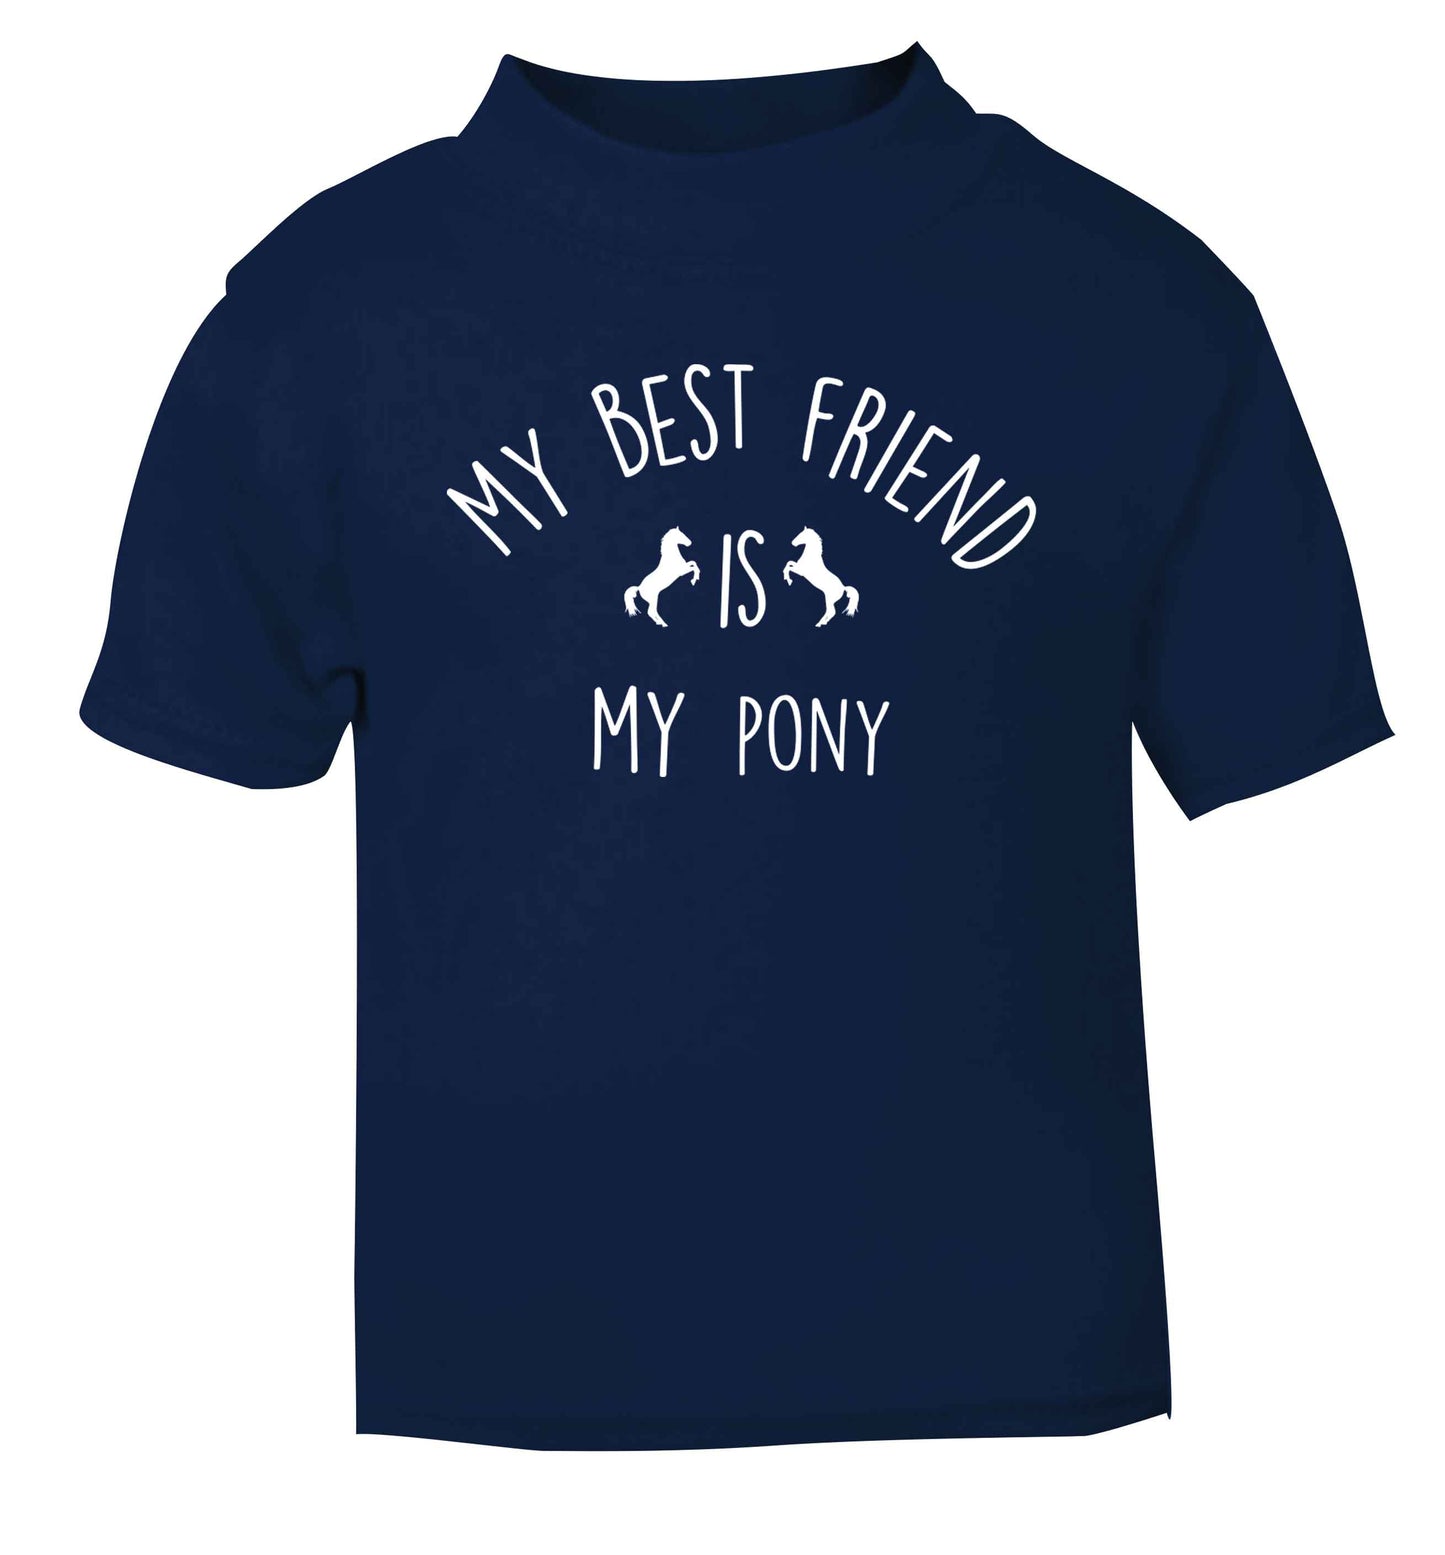 My best friend is my pony navy baby toddler Tshirt 2 Years